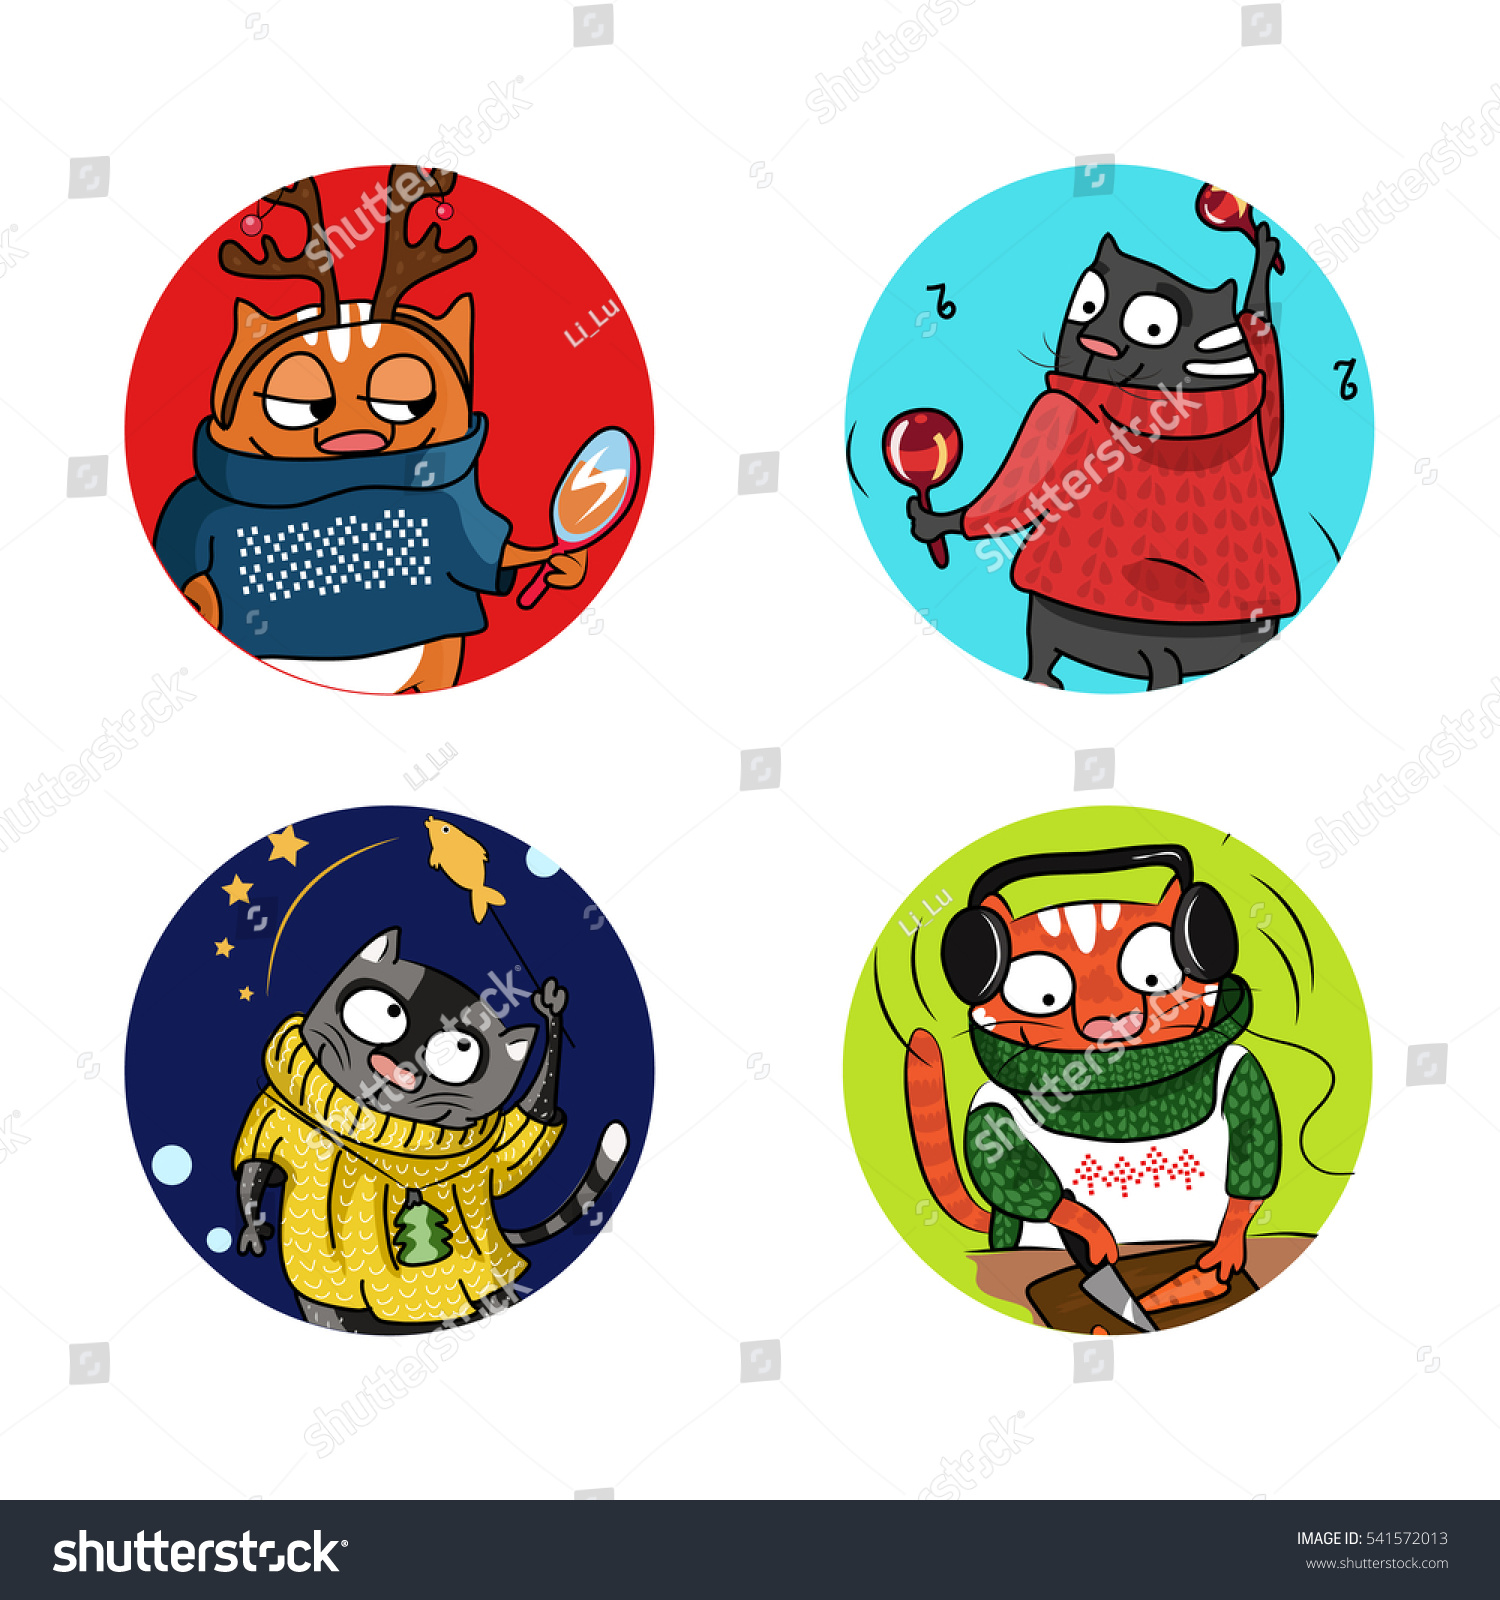 vector image of festive funny cats icons